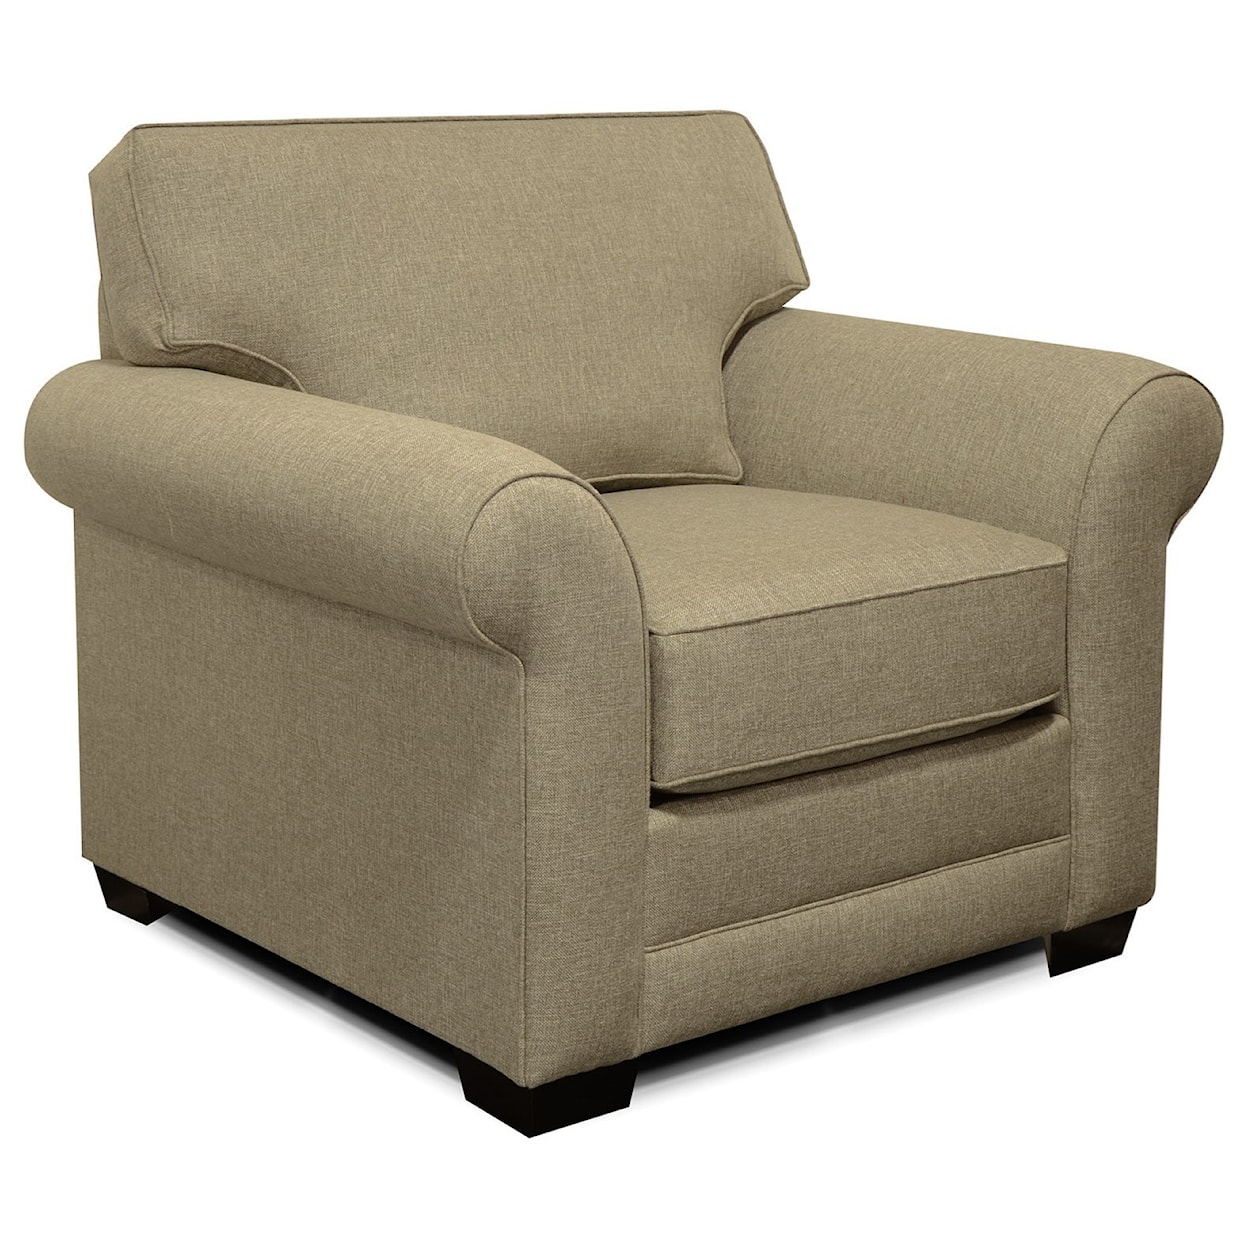 Tennessee Custom Upholstery 5630 Series Upholstered Chair